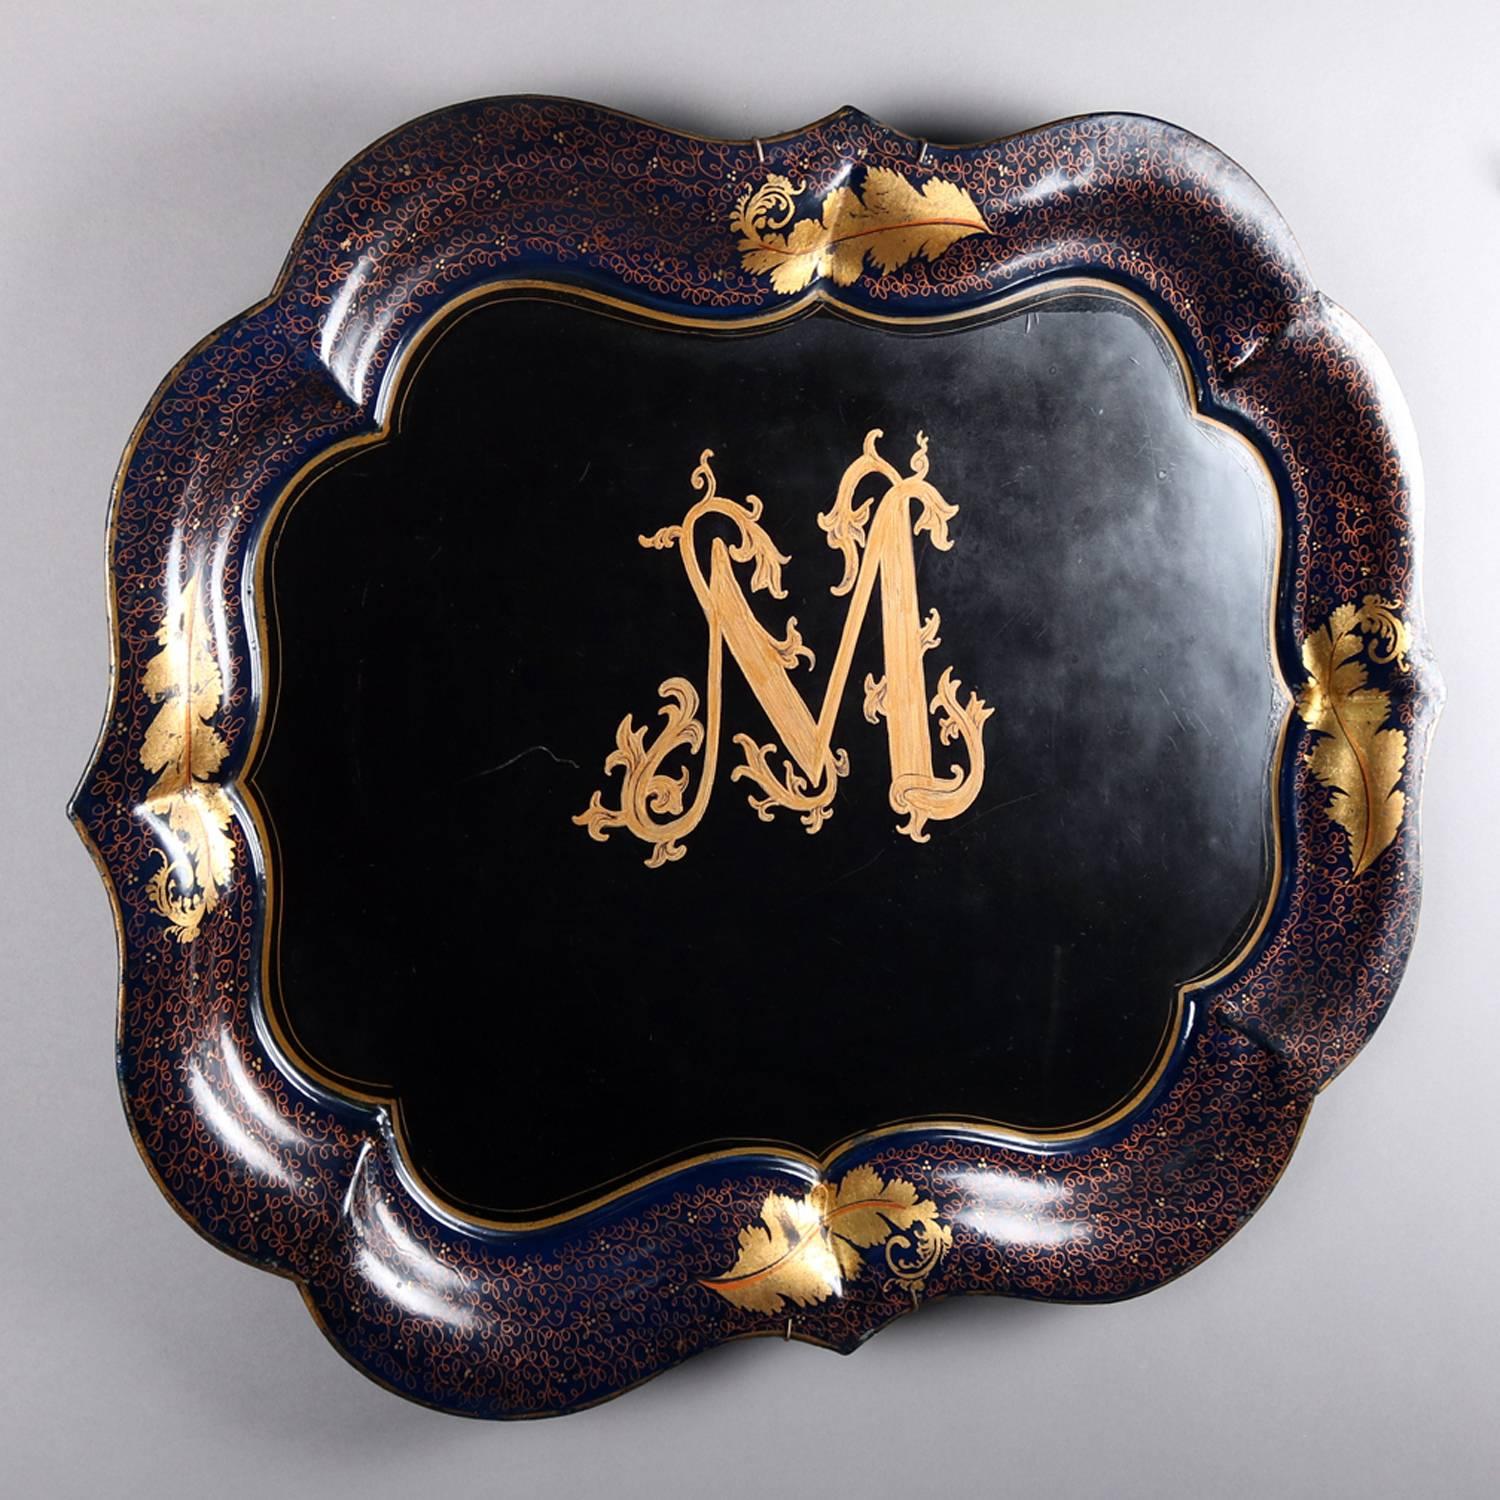 Antique tole ware serving tray features scalloped form with hand-painted gilt central 